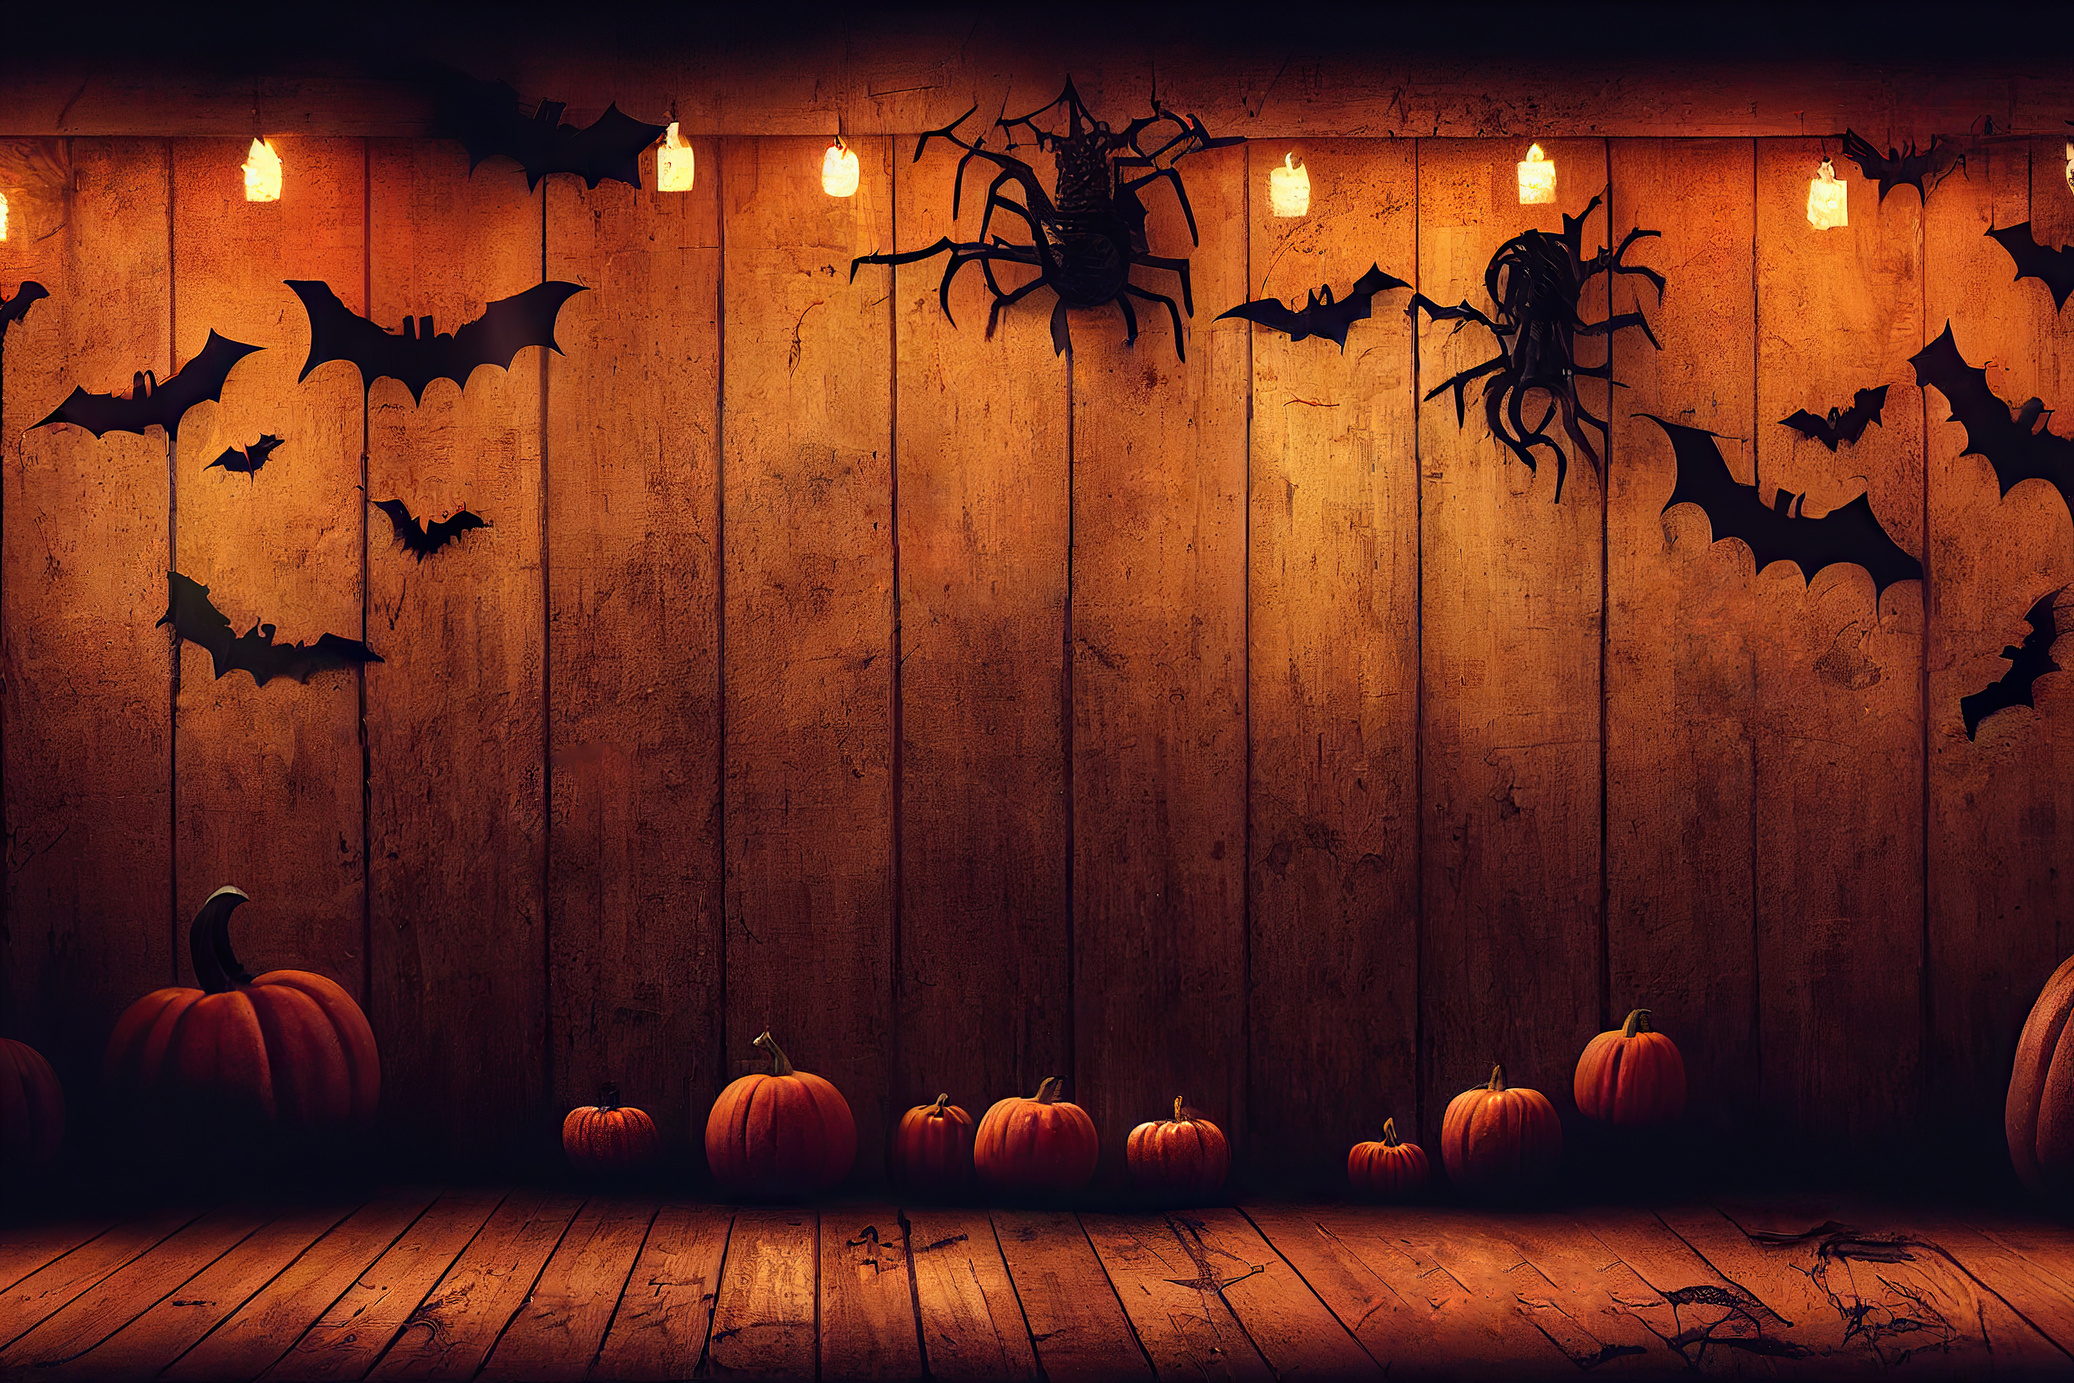 Woden wall with Halloween decorations.